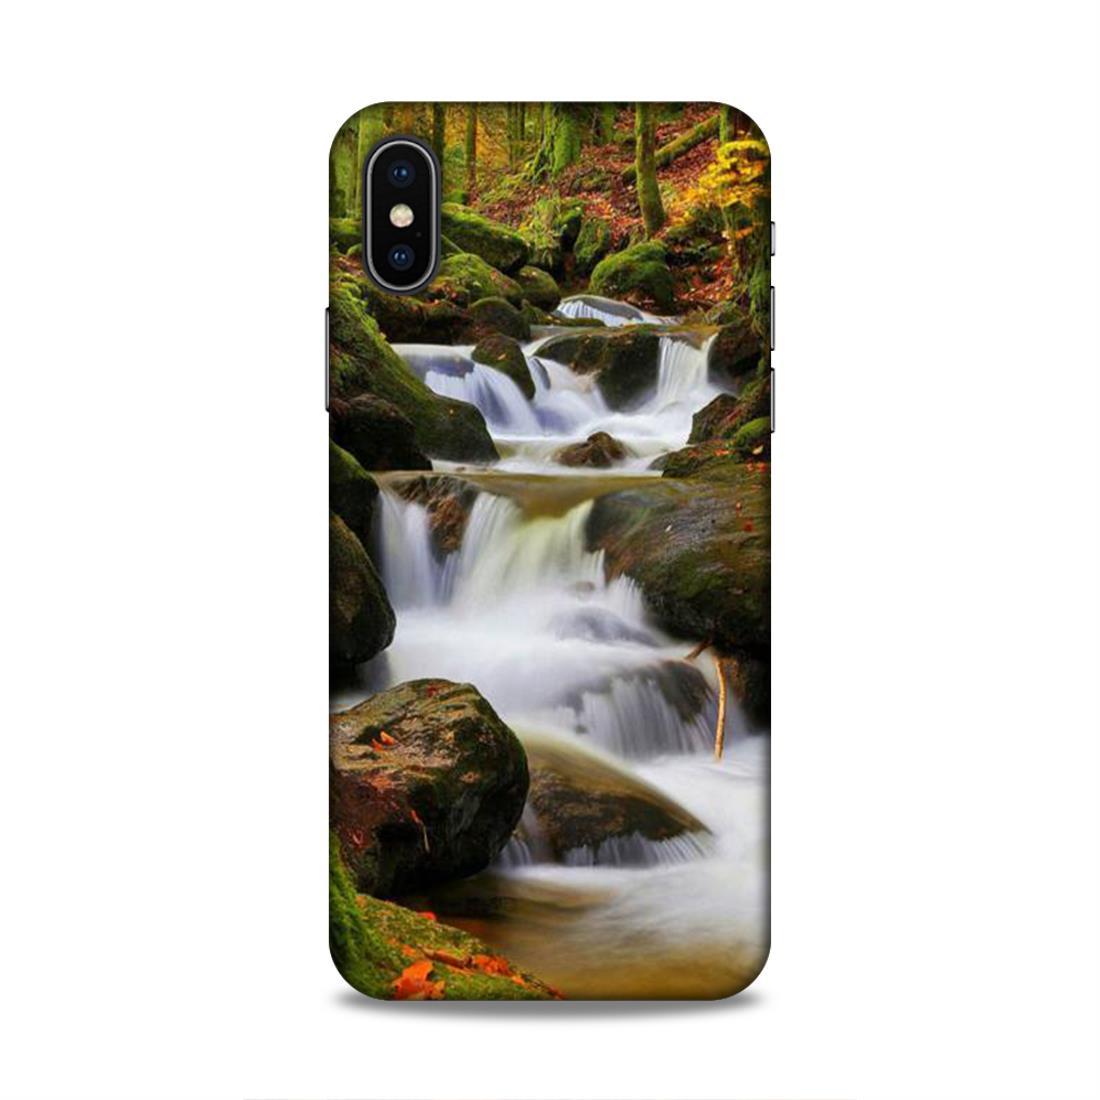 Natural Waterfall iPhone X Phone Cover Case